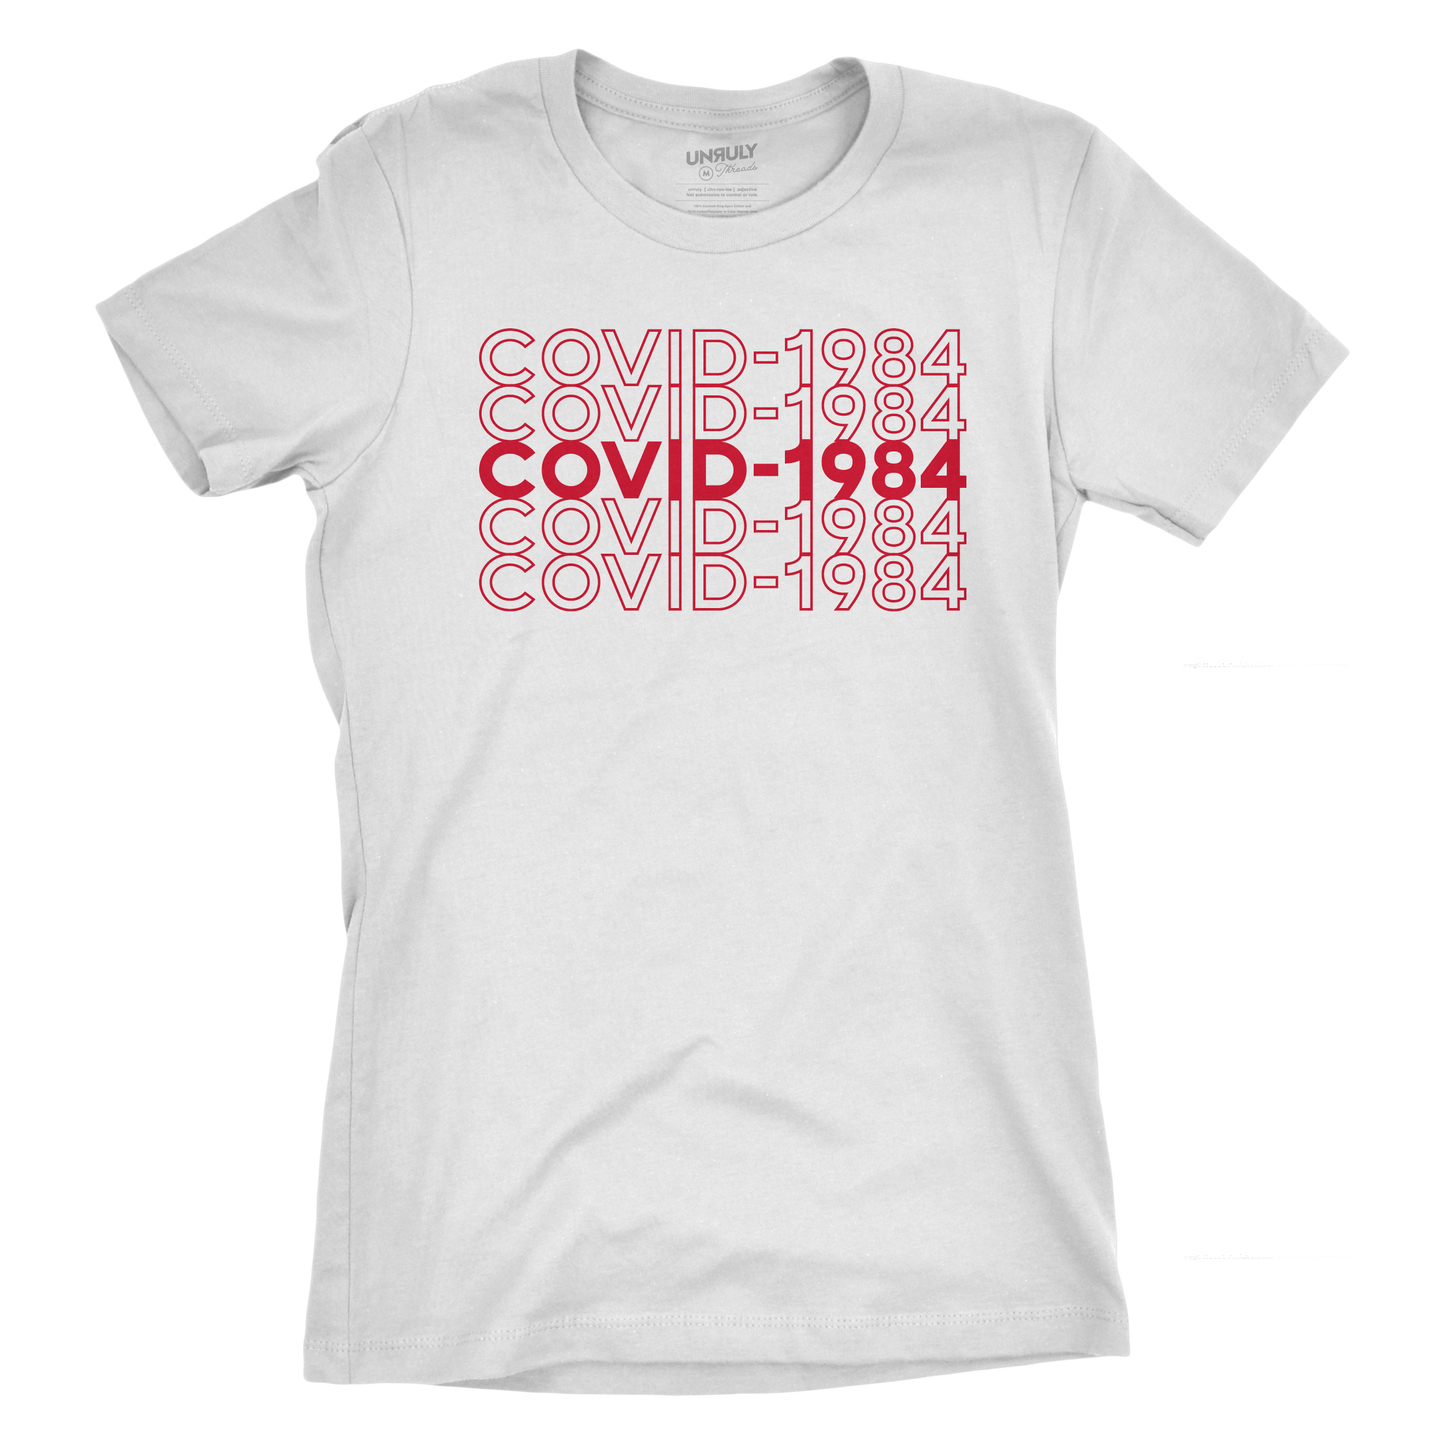 Womens Covid-1984 Fitted Jersey Tee - White